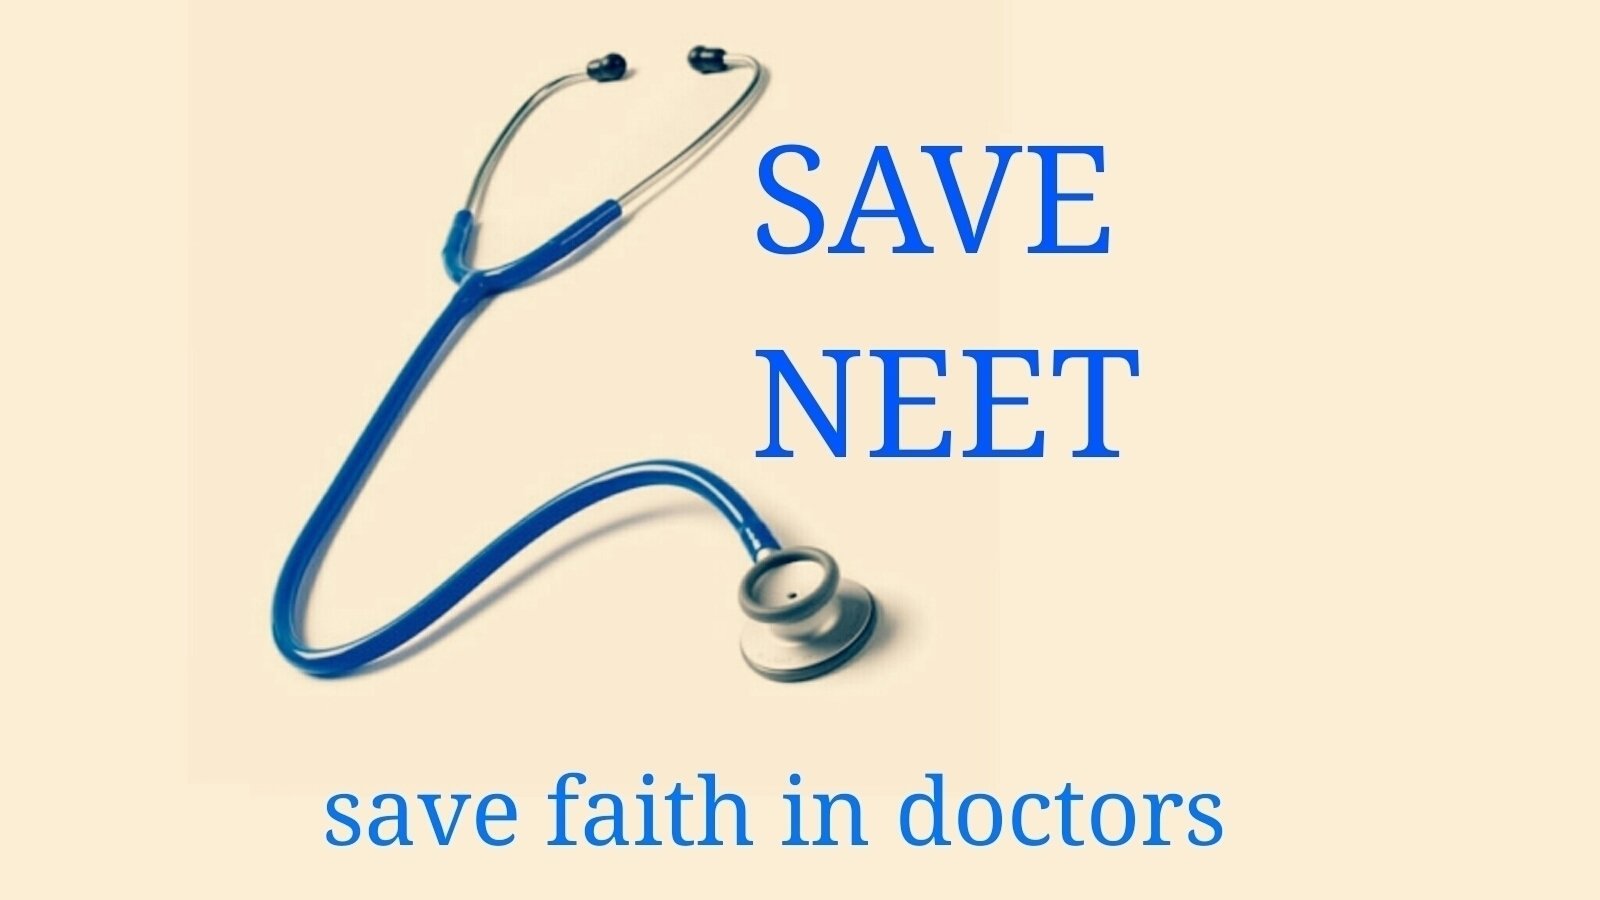 Petition · Justice for deserving medical aspirant and justification from CBSE regarding paper leak. · Change.org